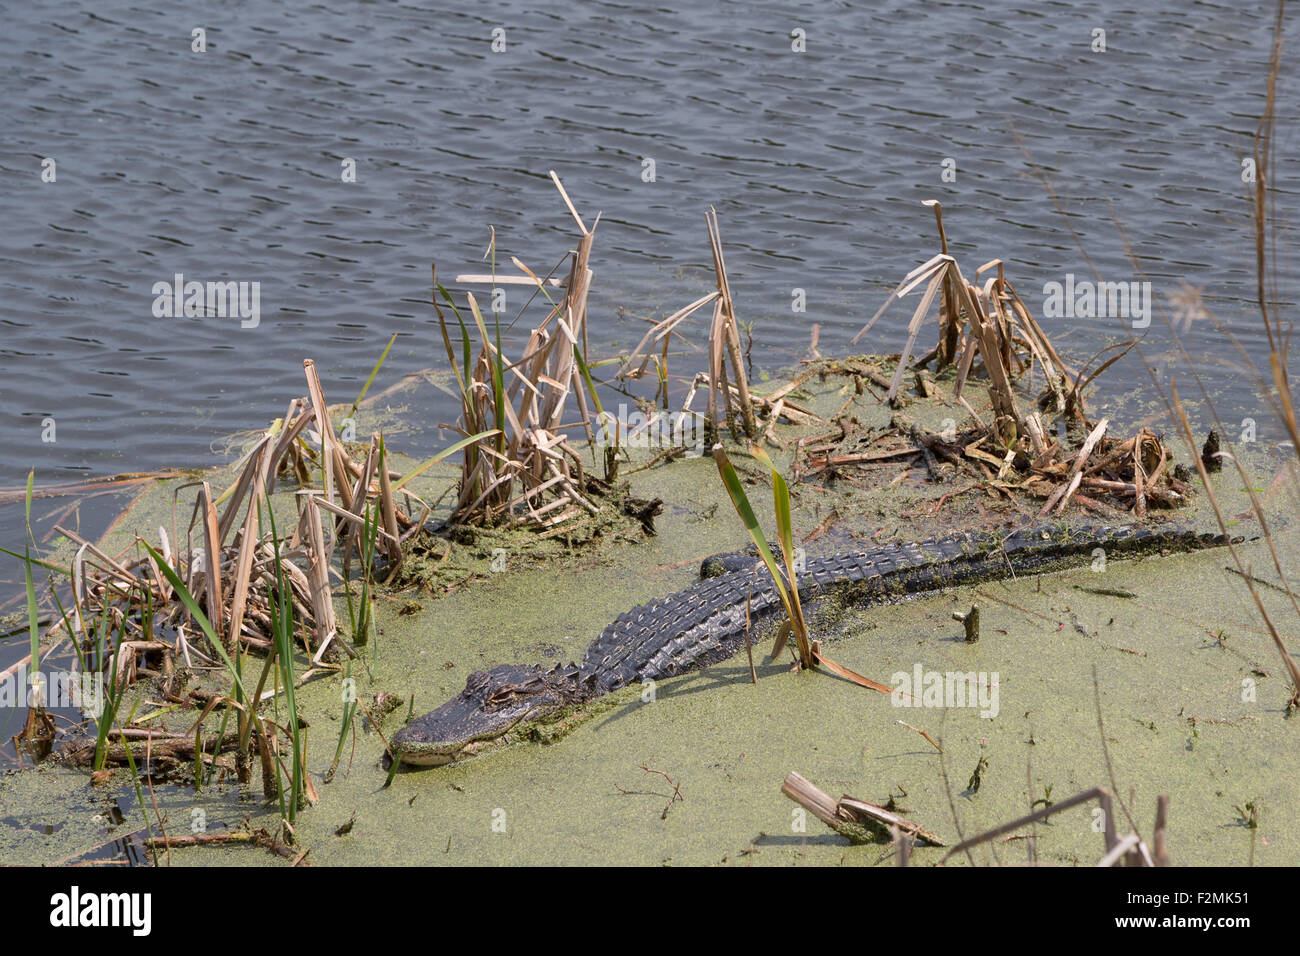 A photograph of an American alligator in the wild near Savannah in Georgia. The alligator is hiding amongst some algae. Stock Photo